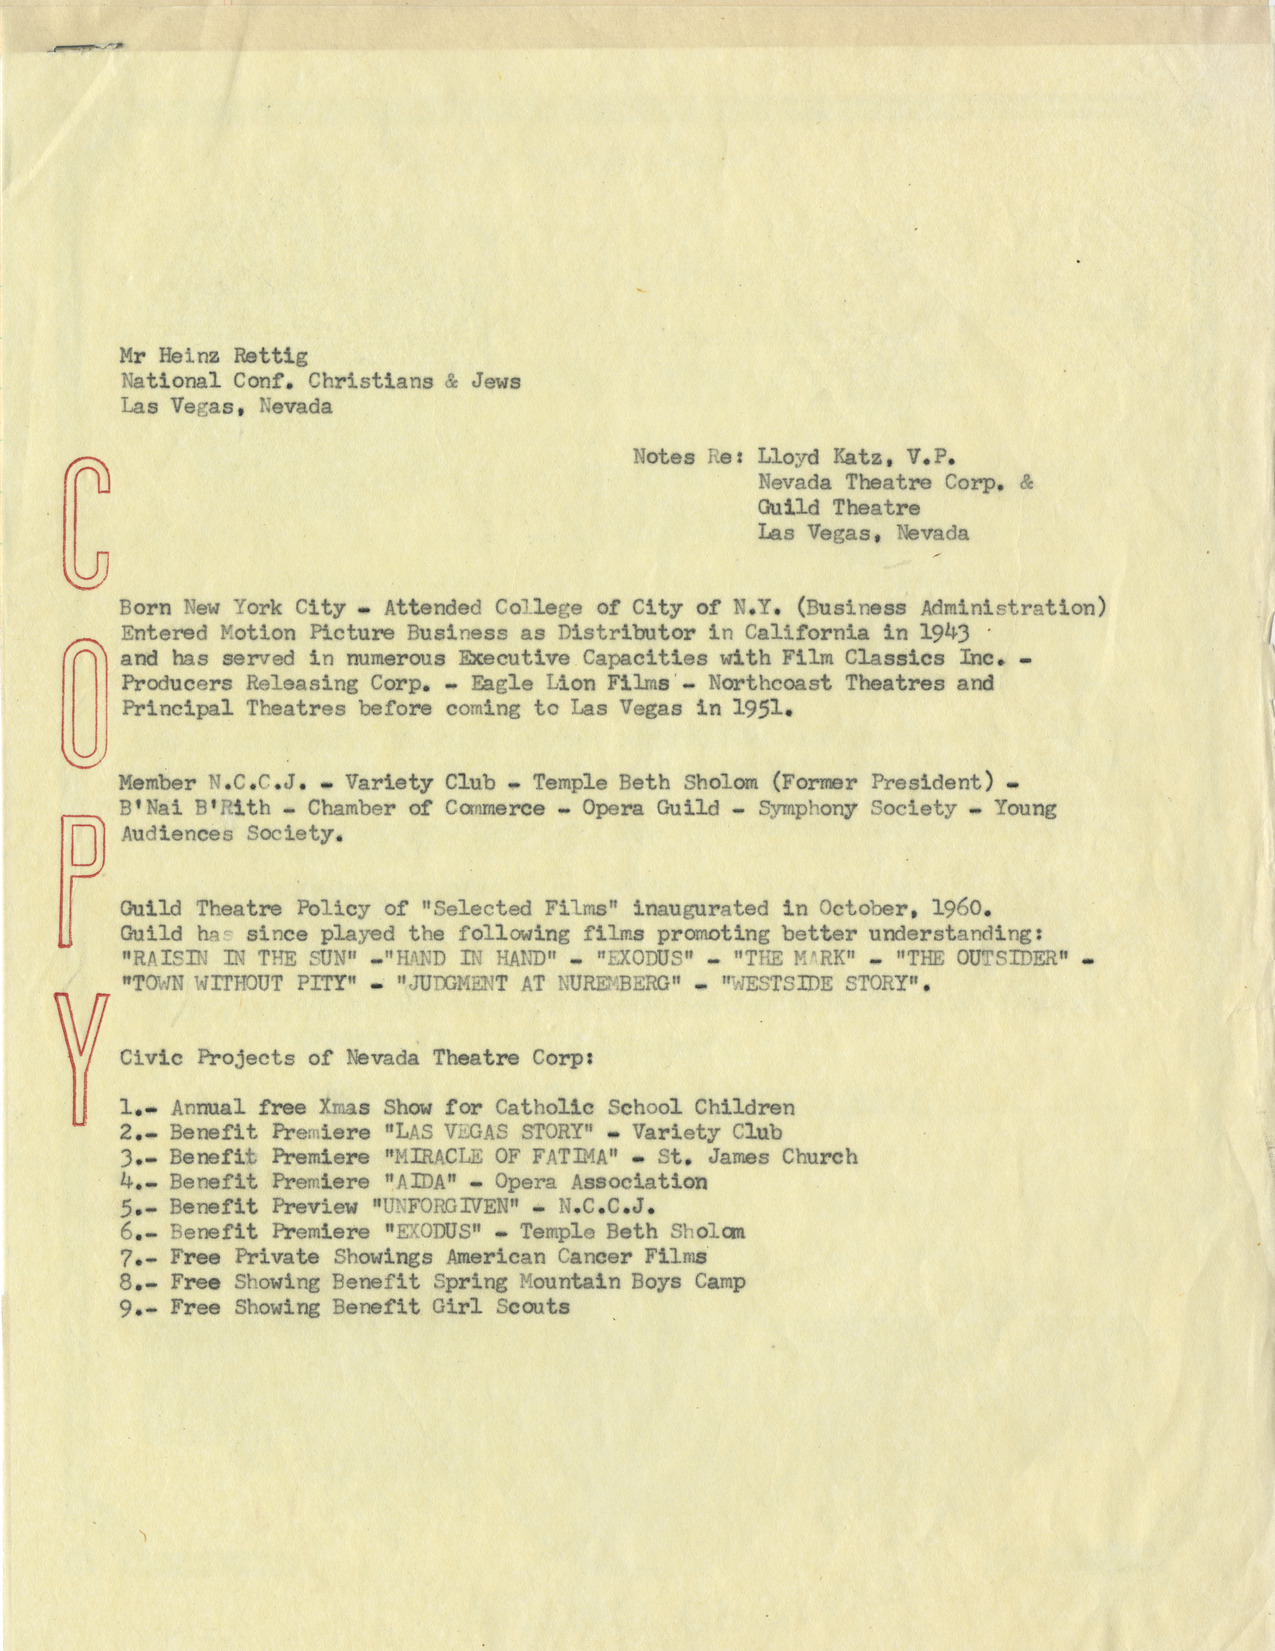 Biographical sheet on Lloyd Katz for the National Conference of Christians and Jews, no date